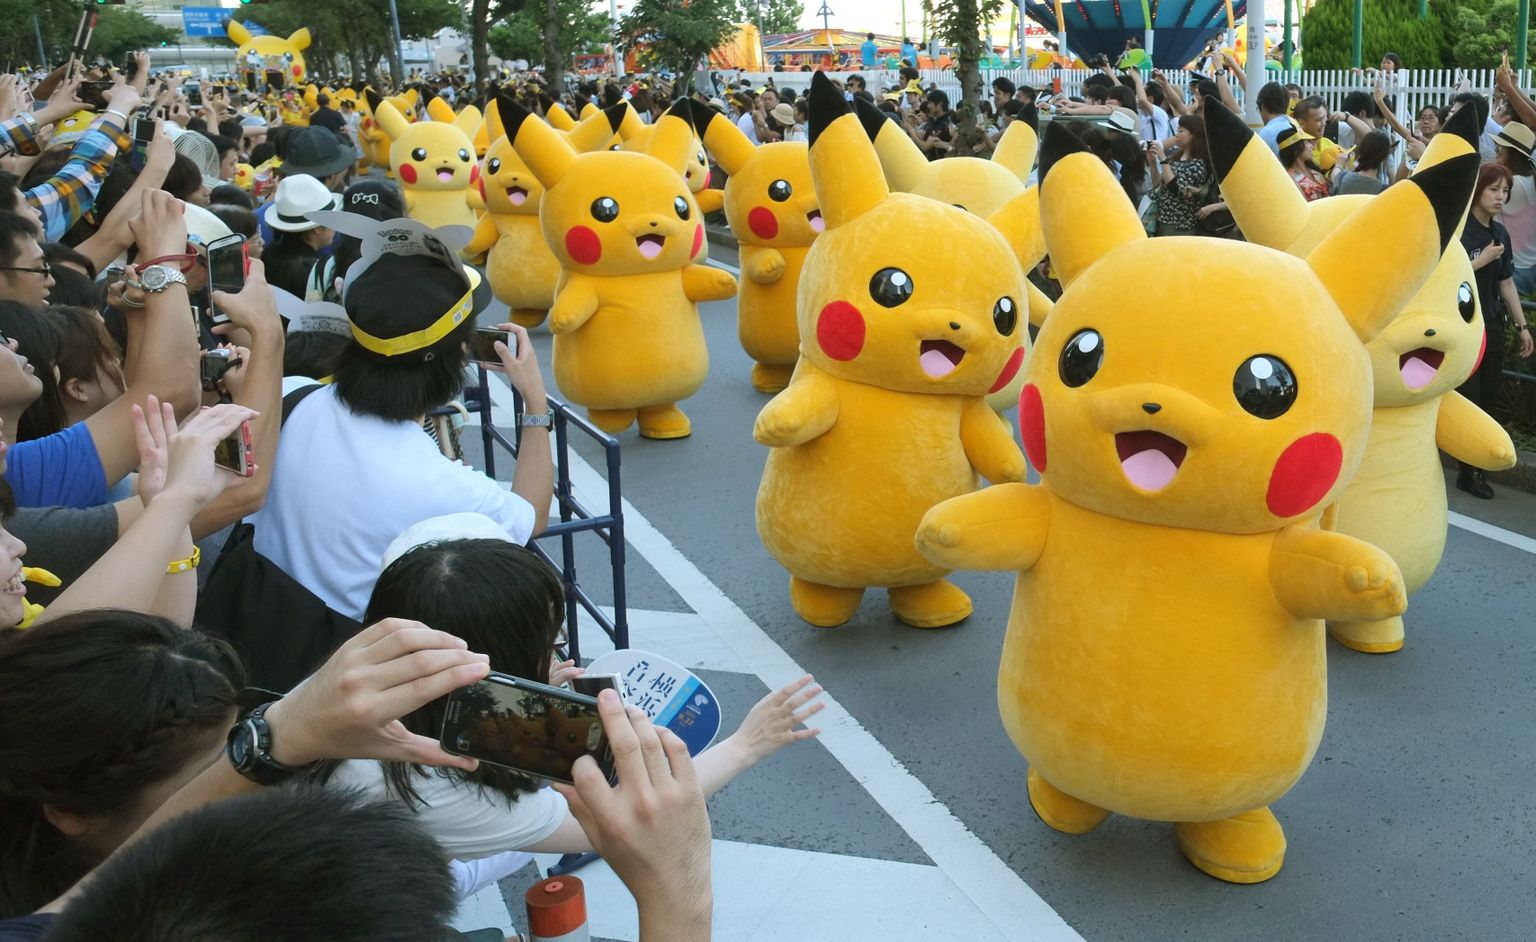 Performers dressed as Pikachu, the popular animation Pokemon series character, perform in the Pikachu parade in Yokohama on August 7, 2016. 
Some 50 life-size Pikachu characters, the most famous from the Pokemon game, marched along the city's waterfront street as visitors took mobile phone pictures and videos of them in scorching sunshine. / AFP PHOTO / KAZUHIRO NOGI